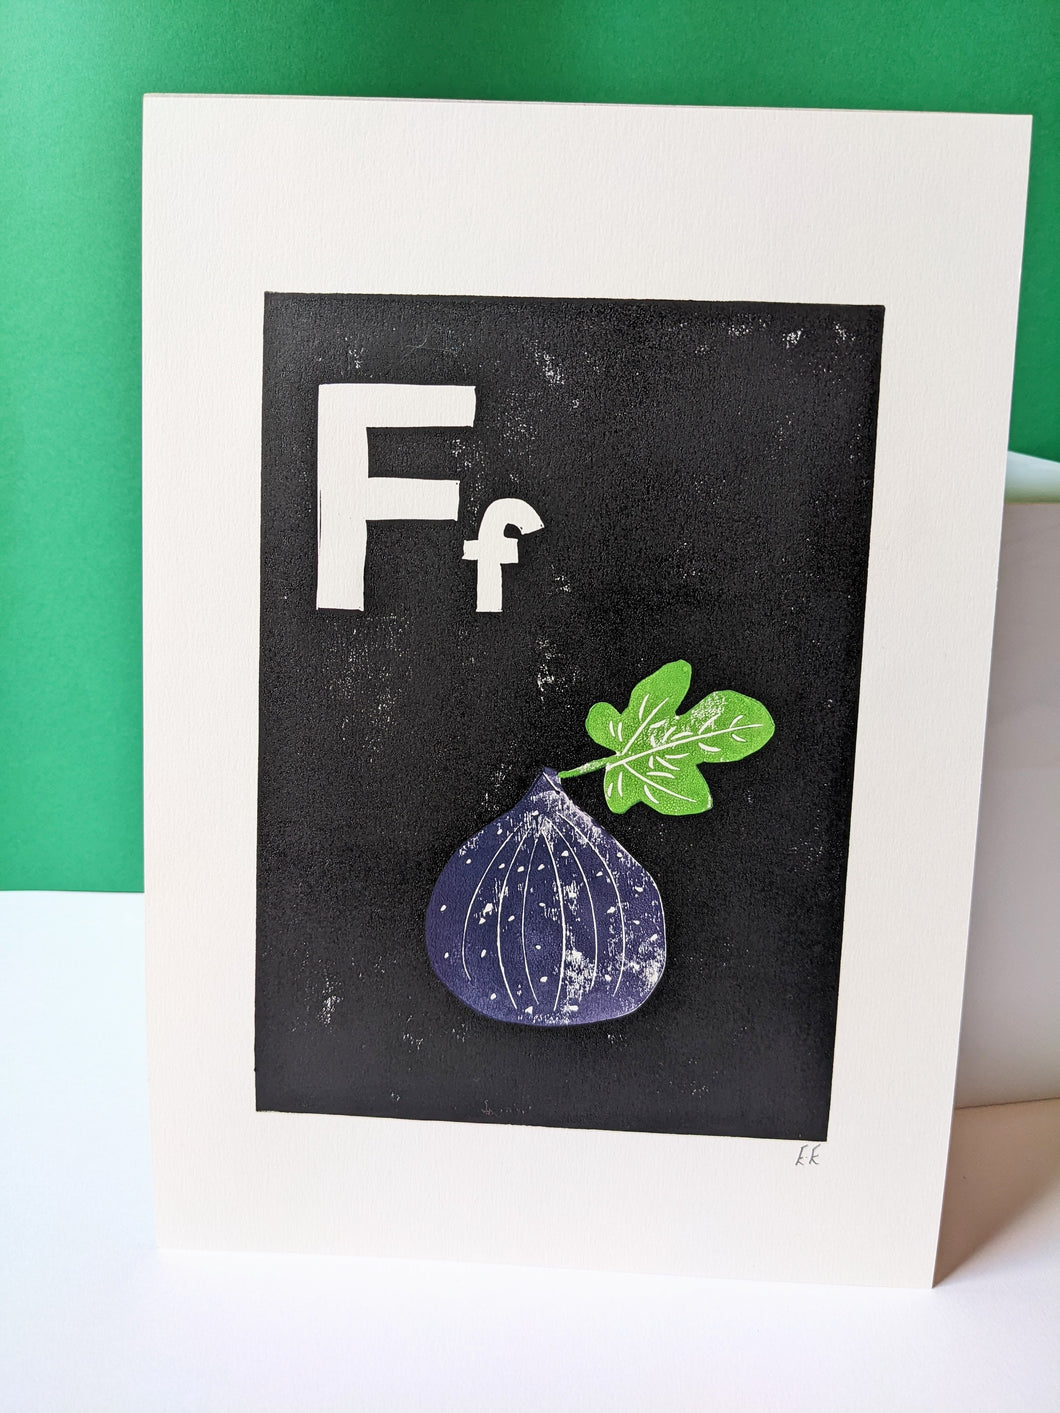 A black print with a purple fig printed on it